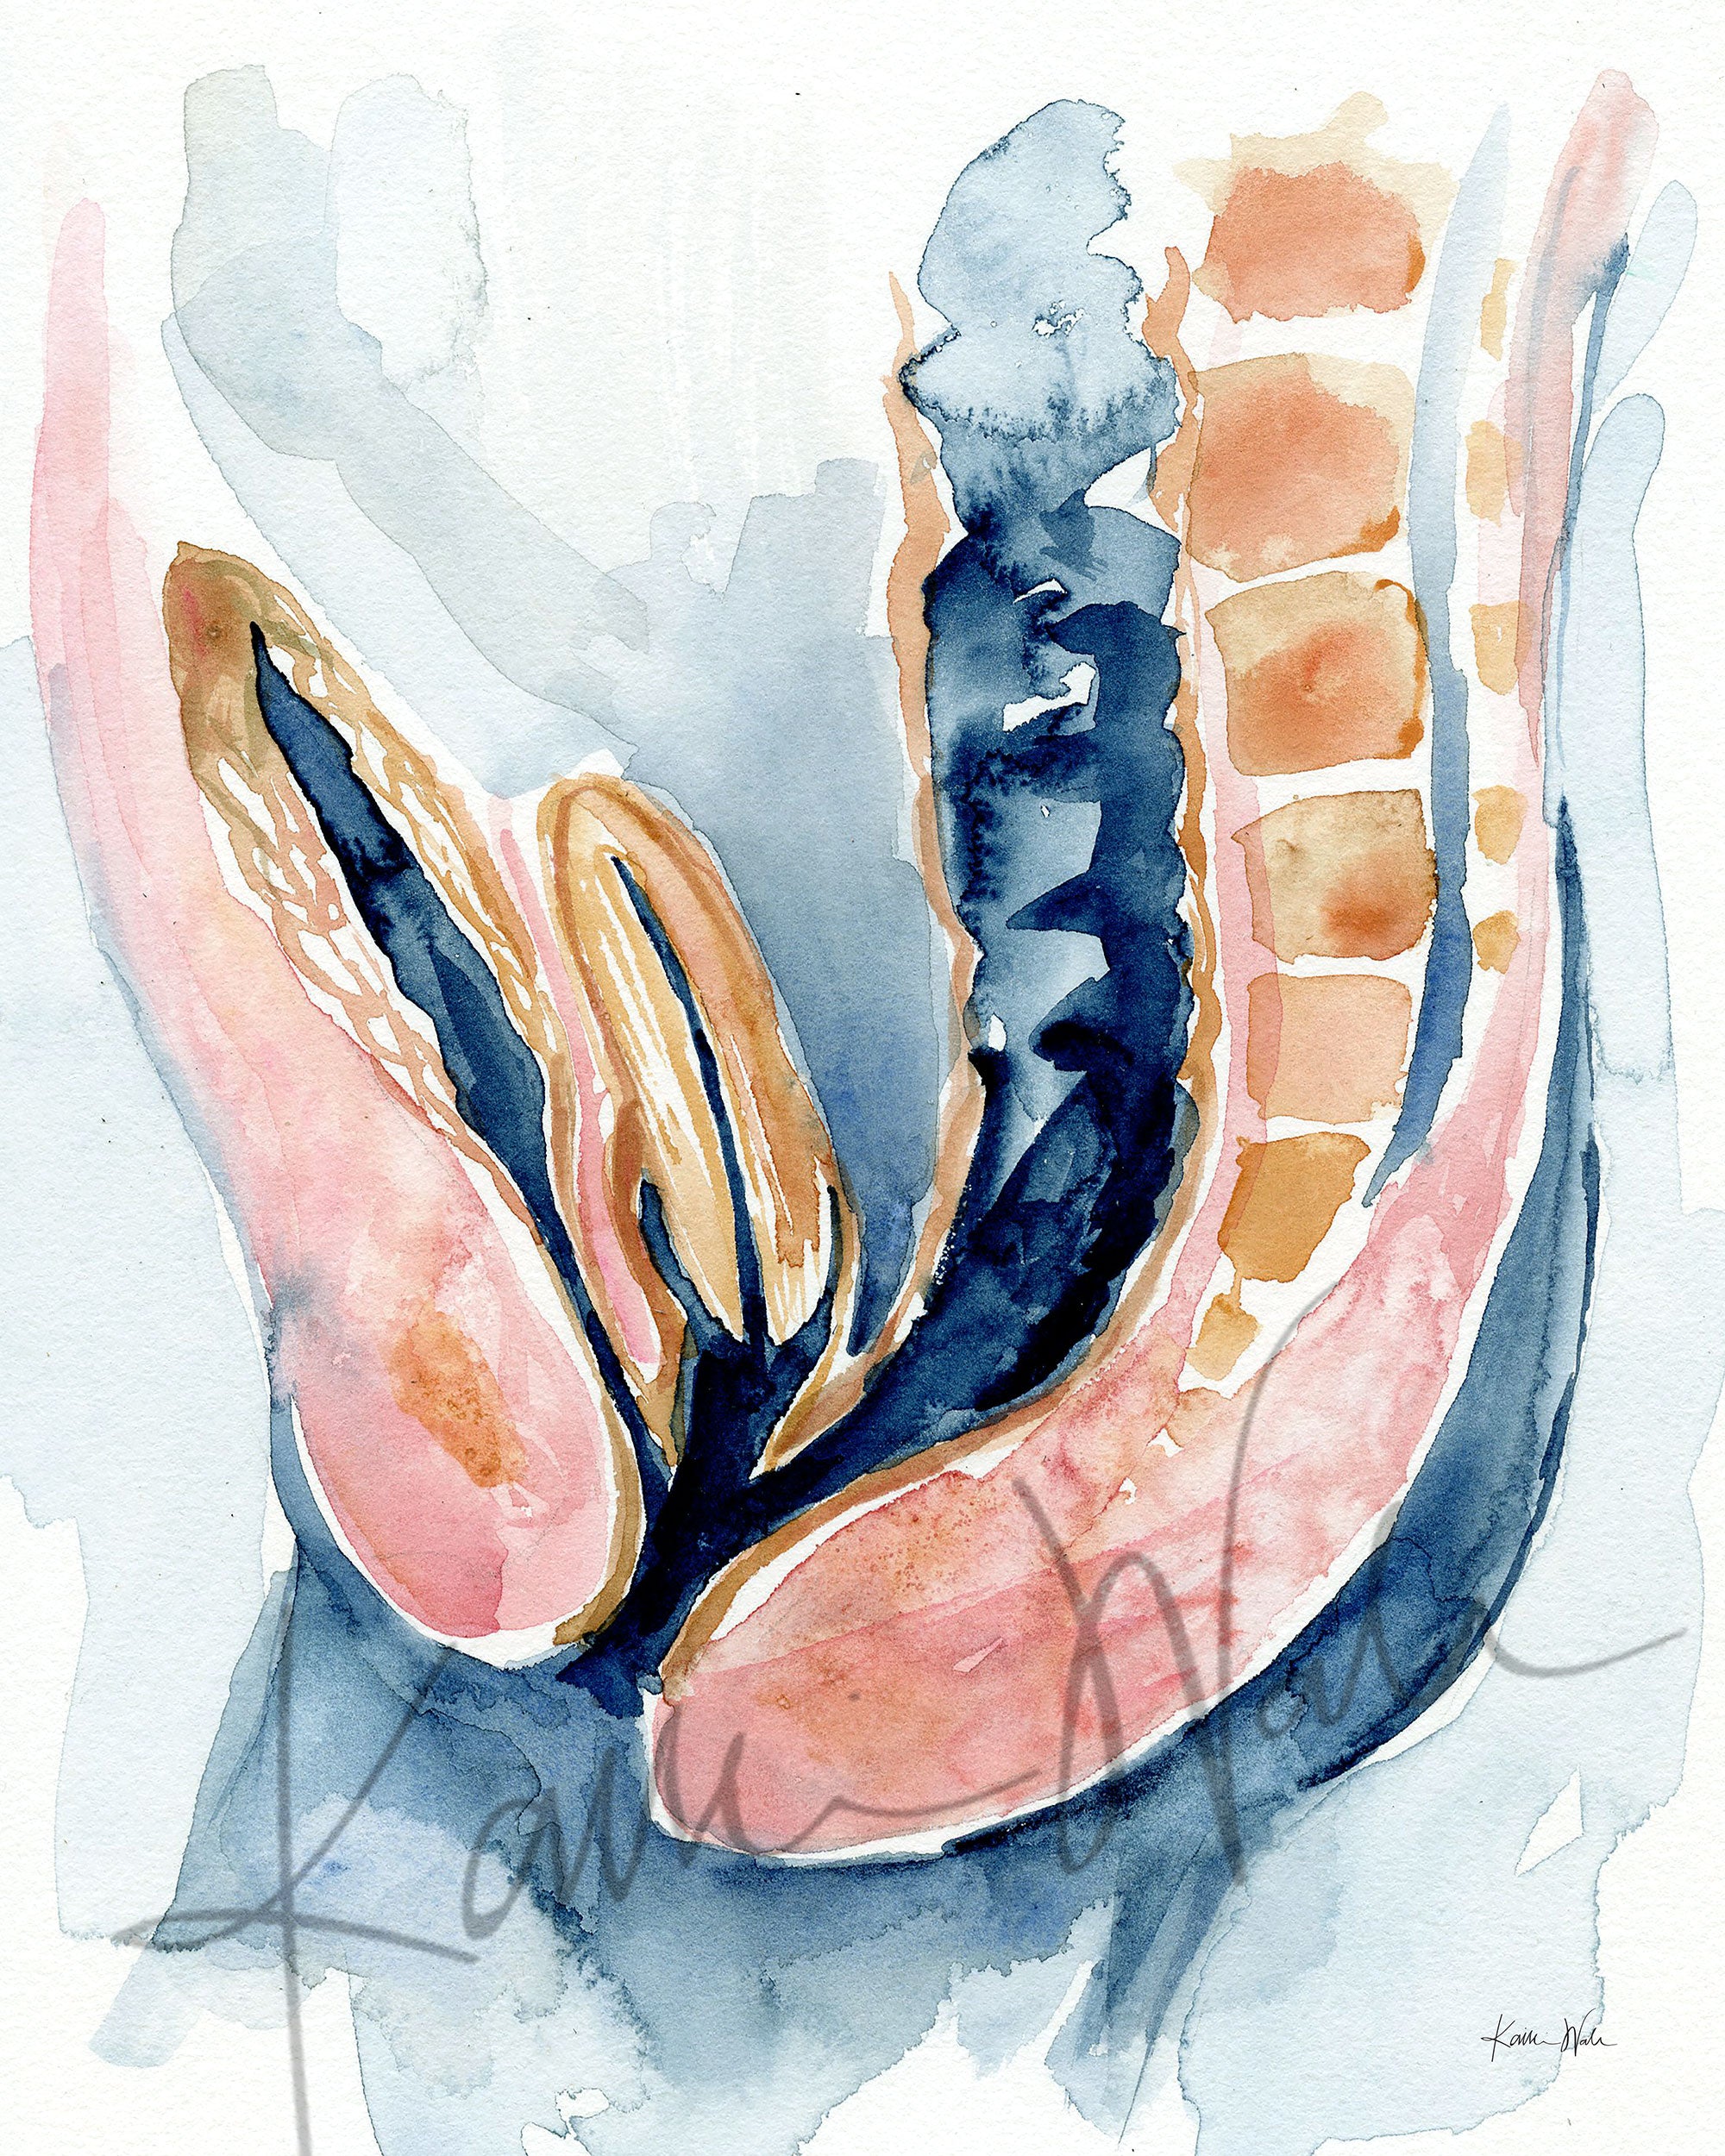 Unframed watercolor painting of a cloaca.